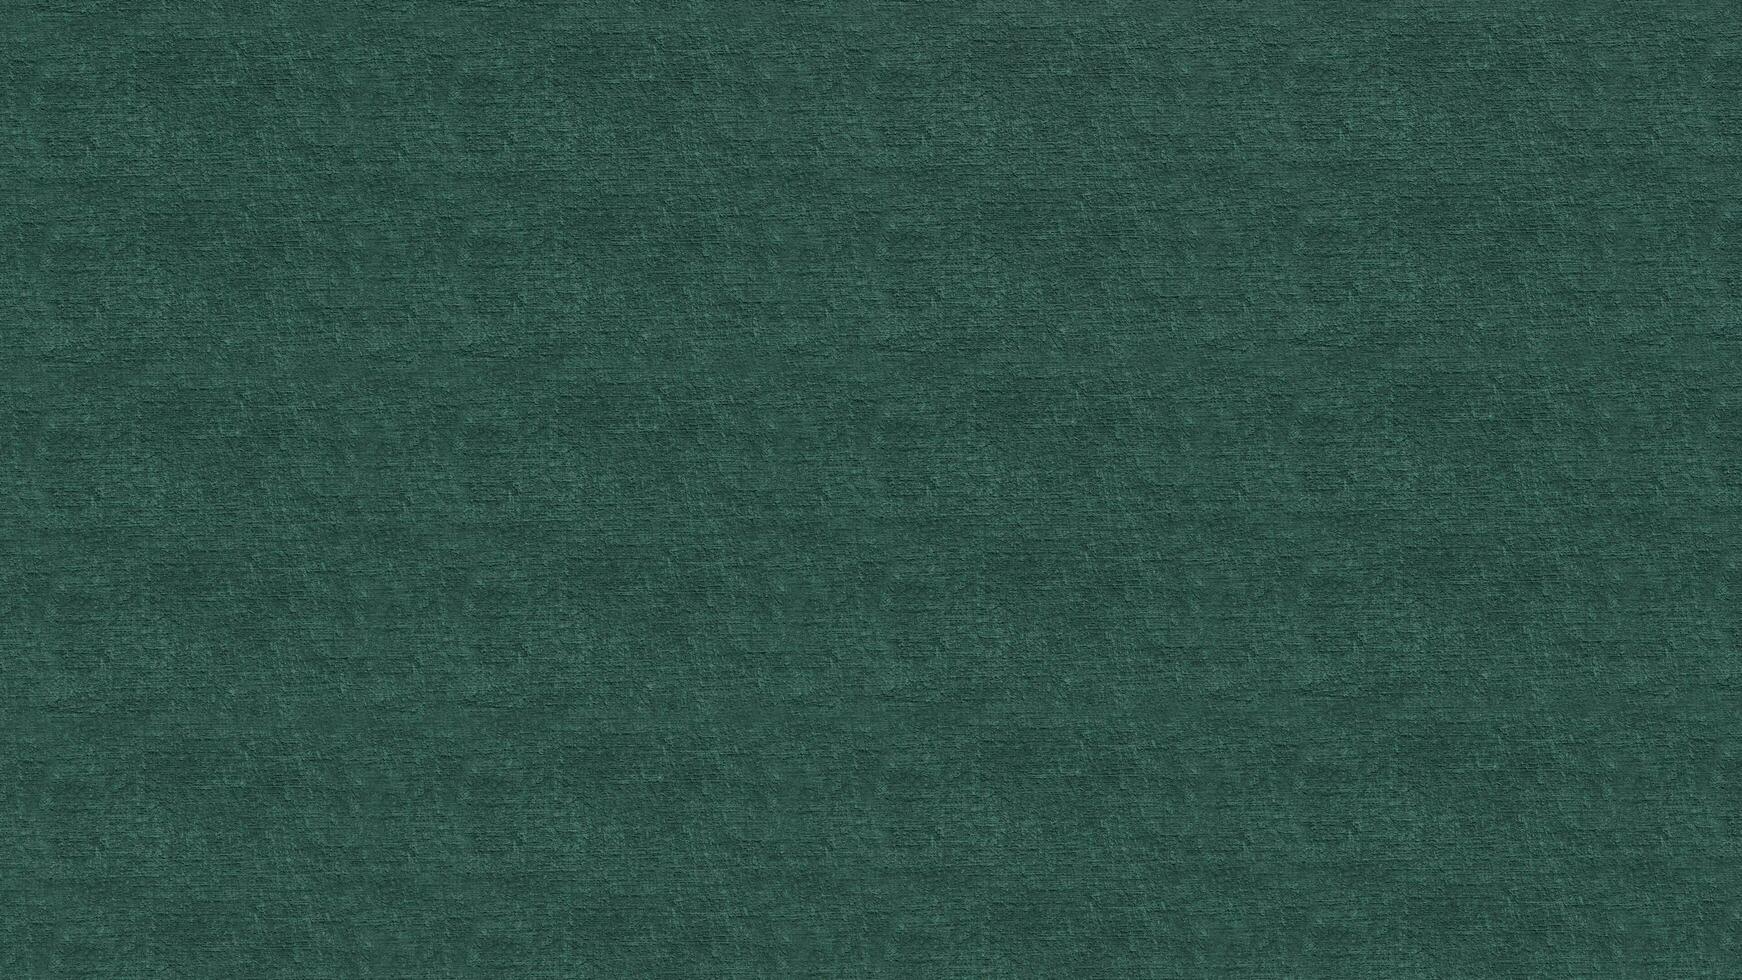 textile texture for background or cover photo